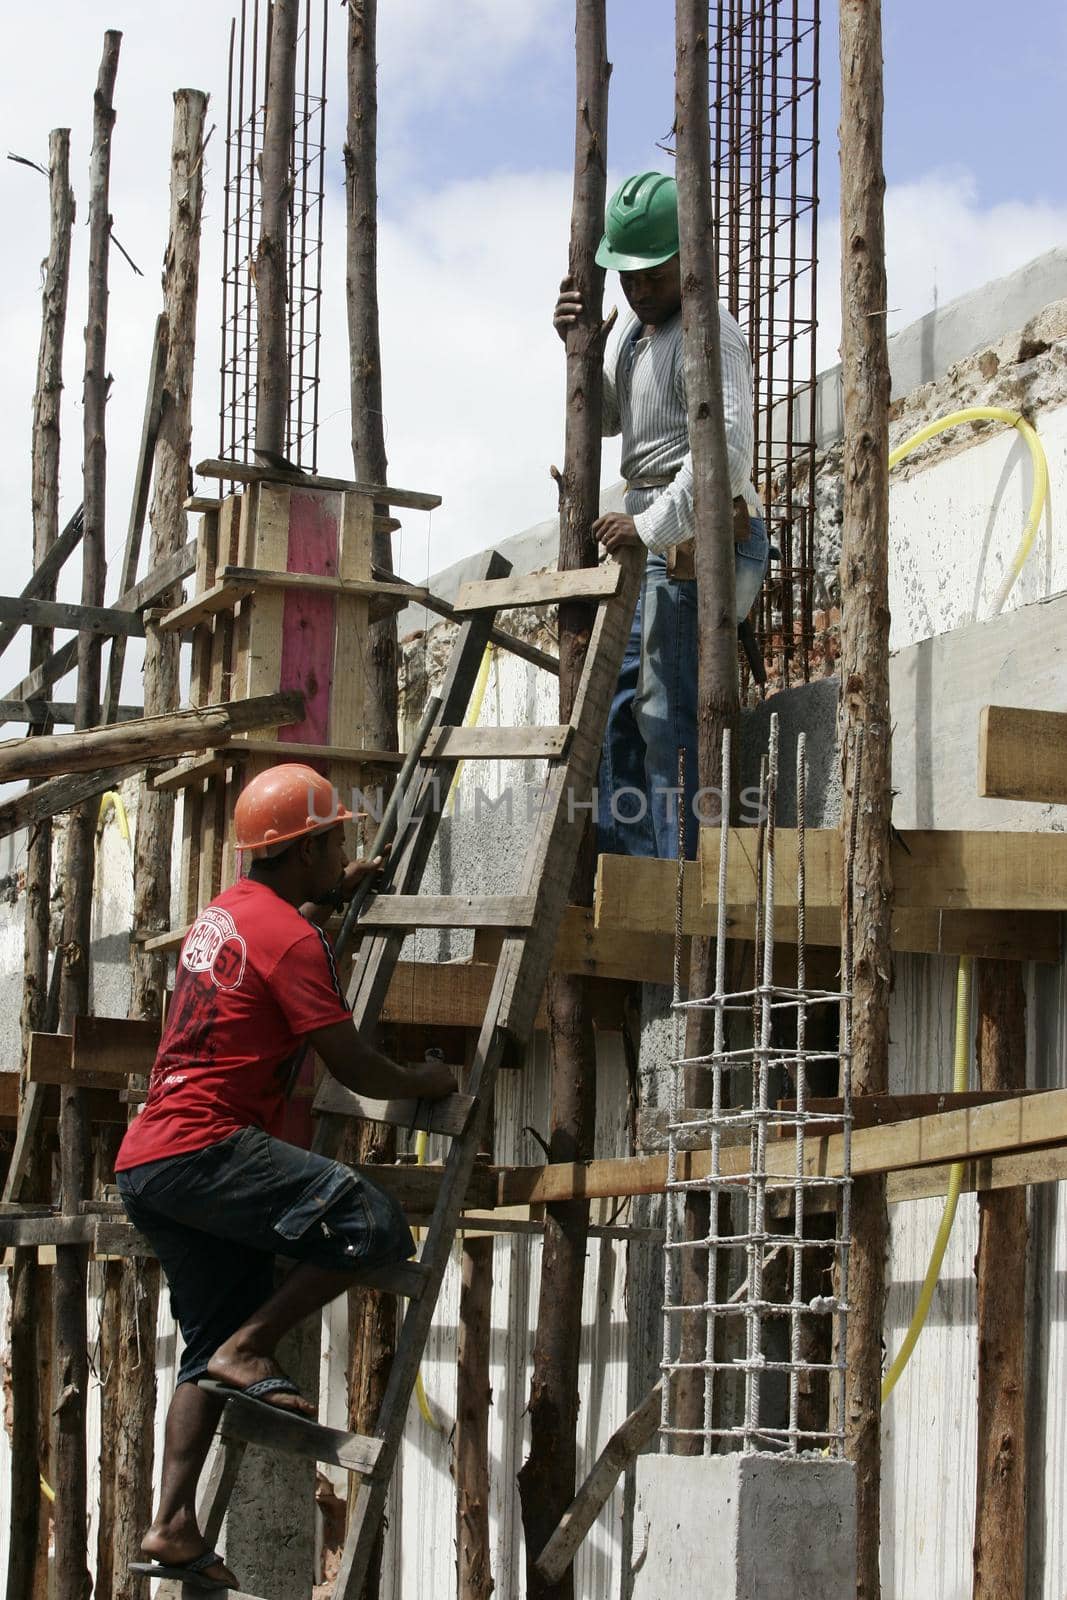 eunapolis, bahia, brazil - august 25, 2009: Construction workers working on construction of a building in the city of Eunapolis.